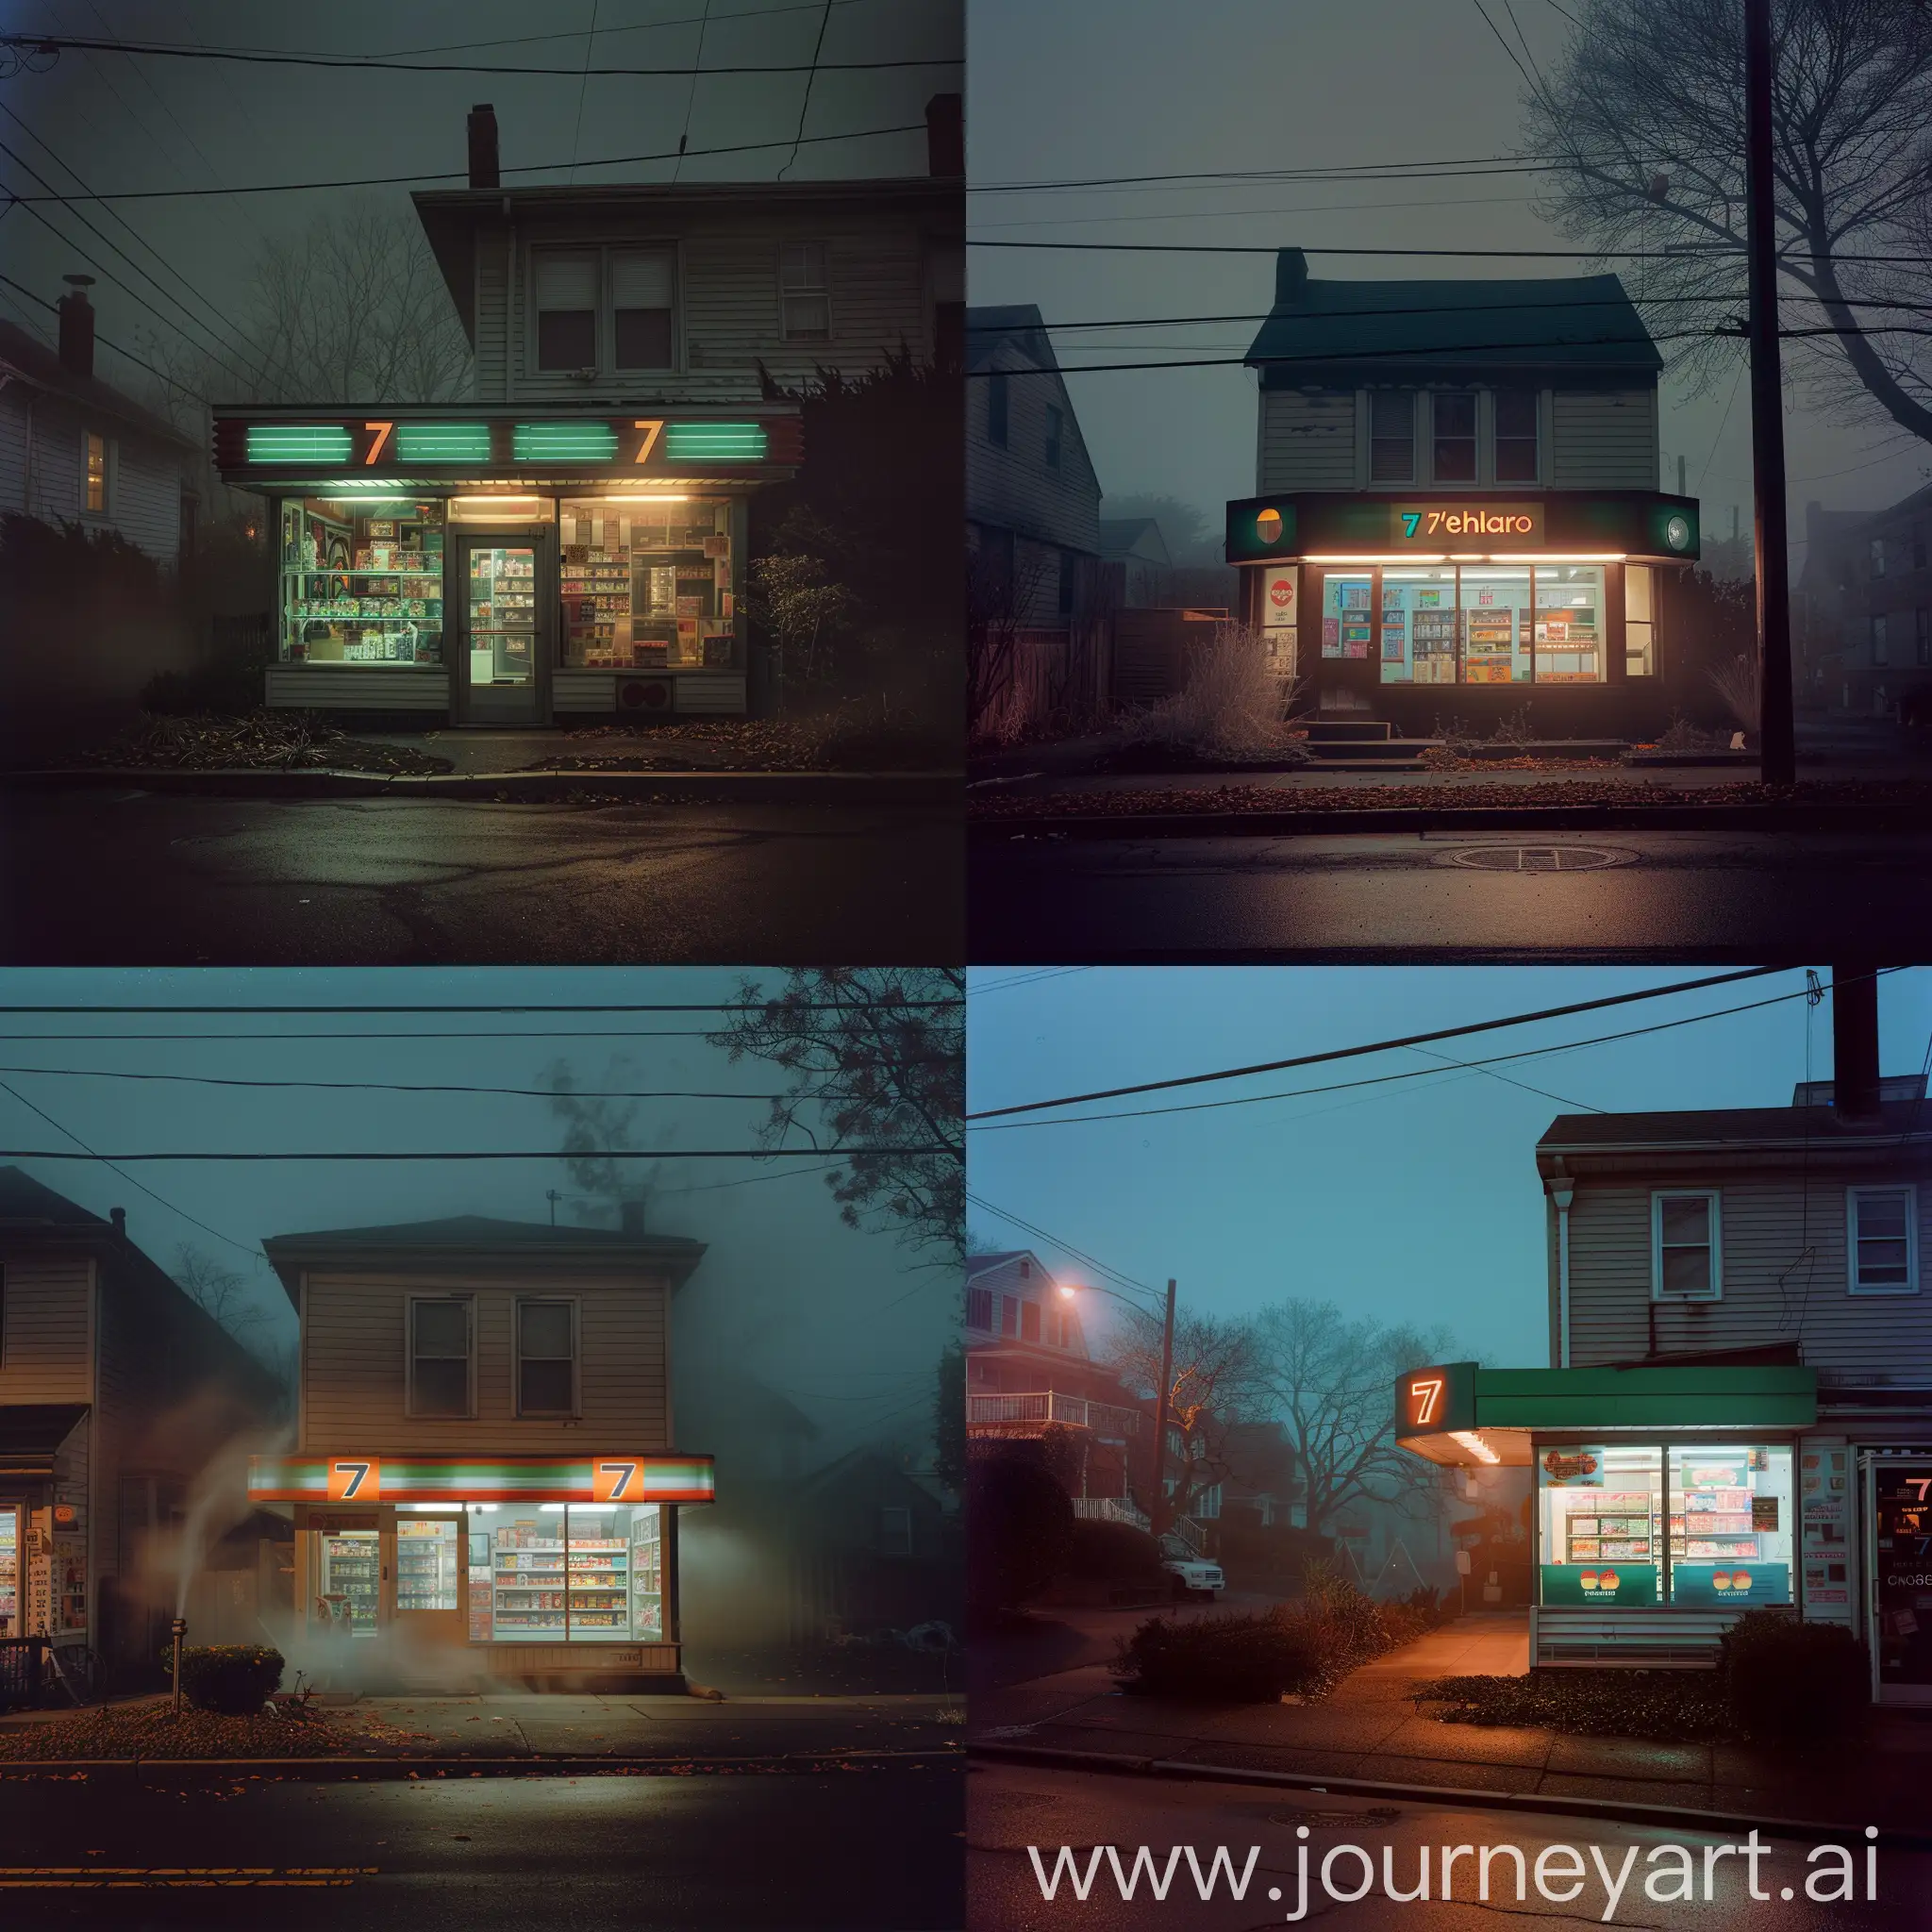 depict a photograph made on large format film camera with portra 800 of a 7eleven store in a residential neighborhood in east coast USA with interior light on and moody fog at night. Inspired by todd hido